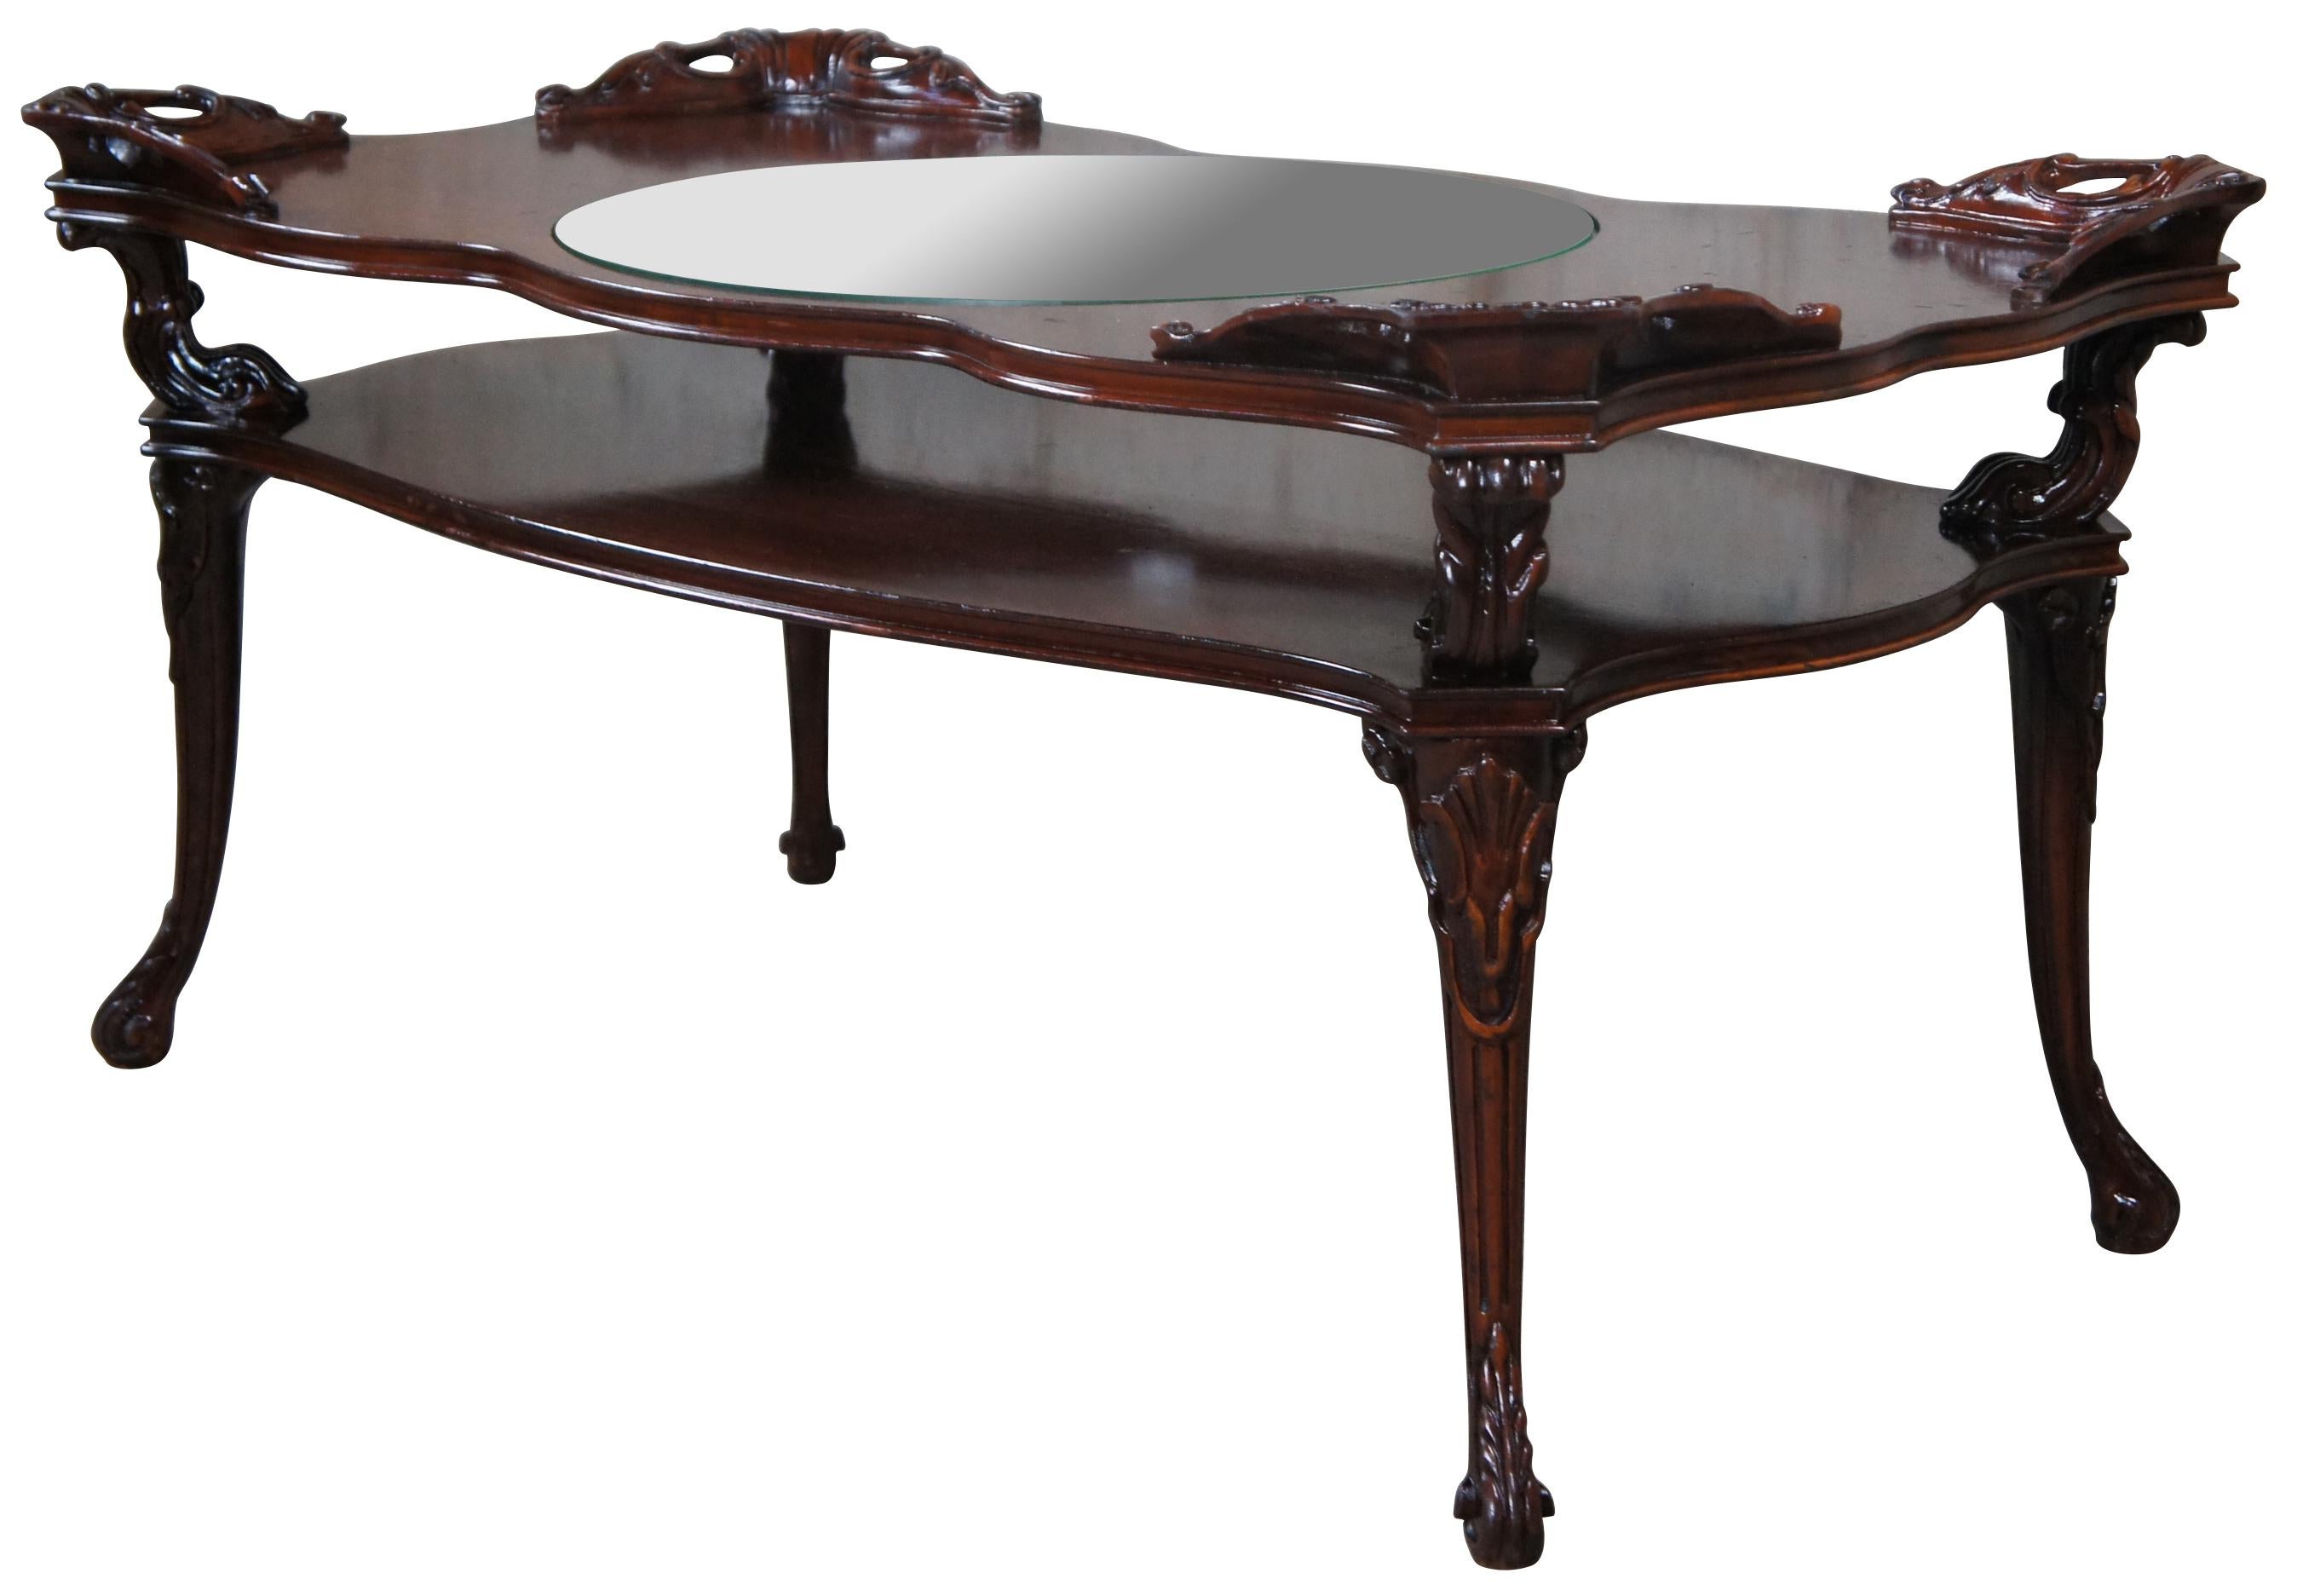 Adams Always Fine Furniture Louis XV style tiered coffee table, circa 1930-40s. Beautifully designed with acanthus and scalloped details. Features an inset round glass top resting on a raised wooden top supported by 